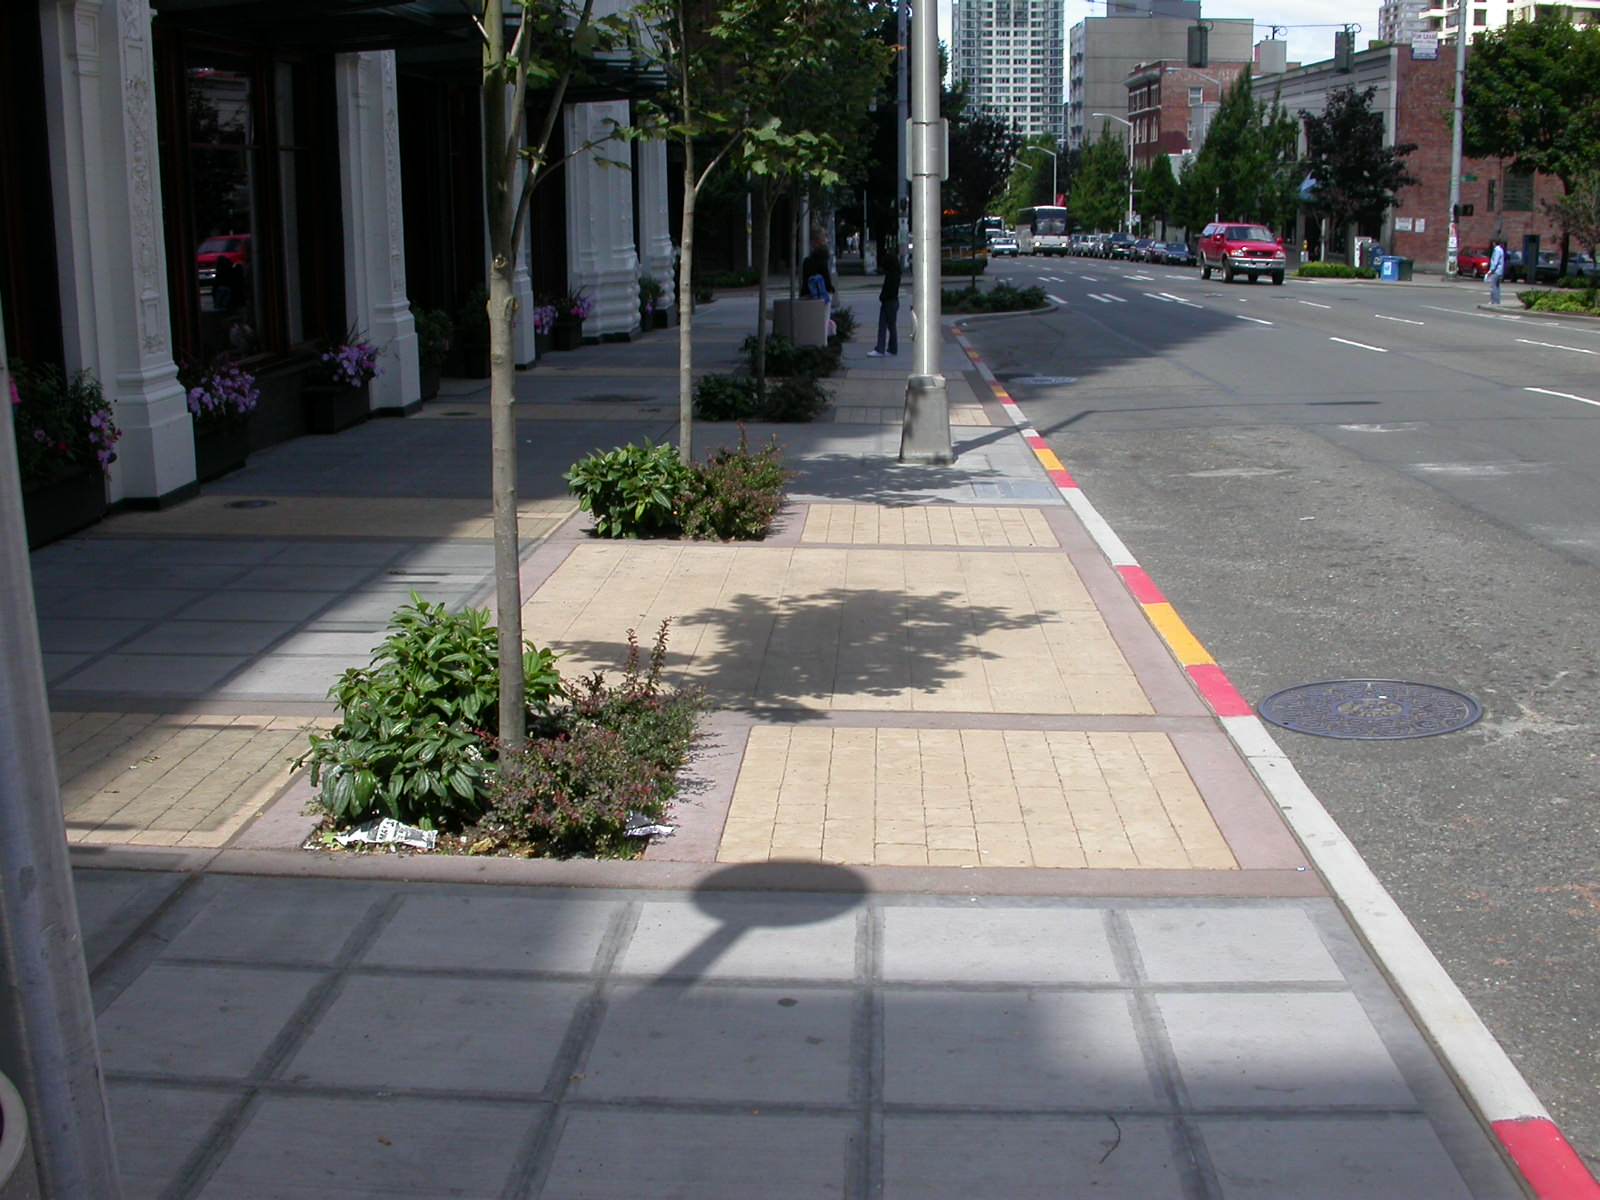 Cristalla Streetscape - varied paving and street trees